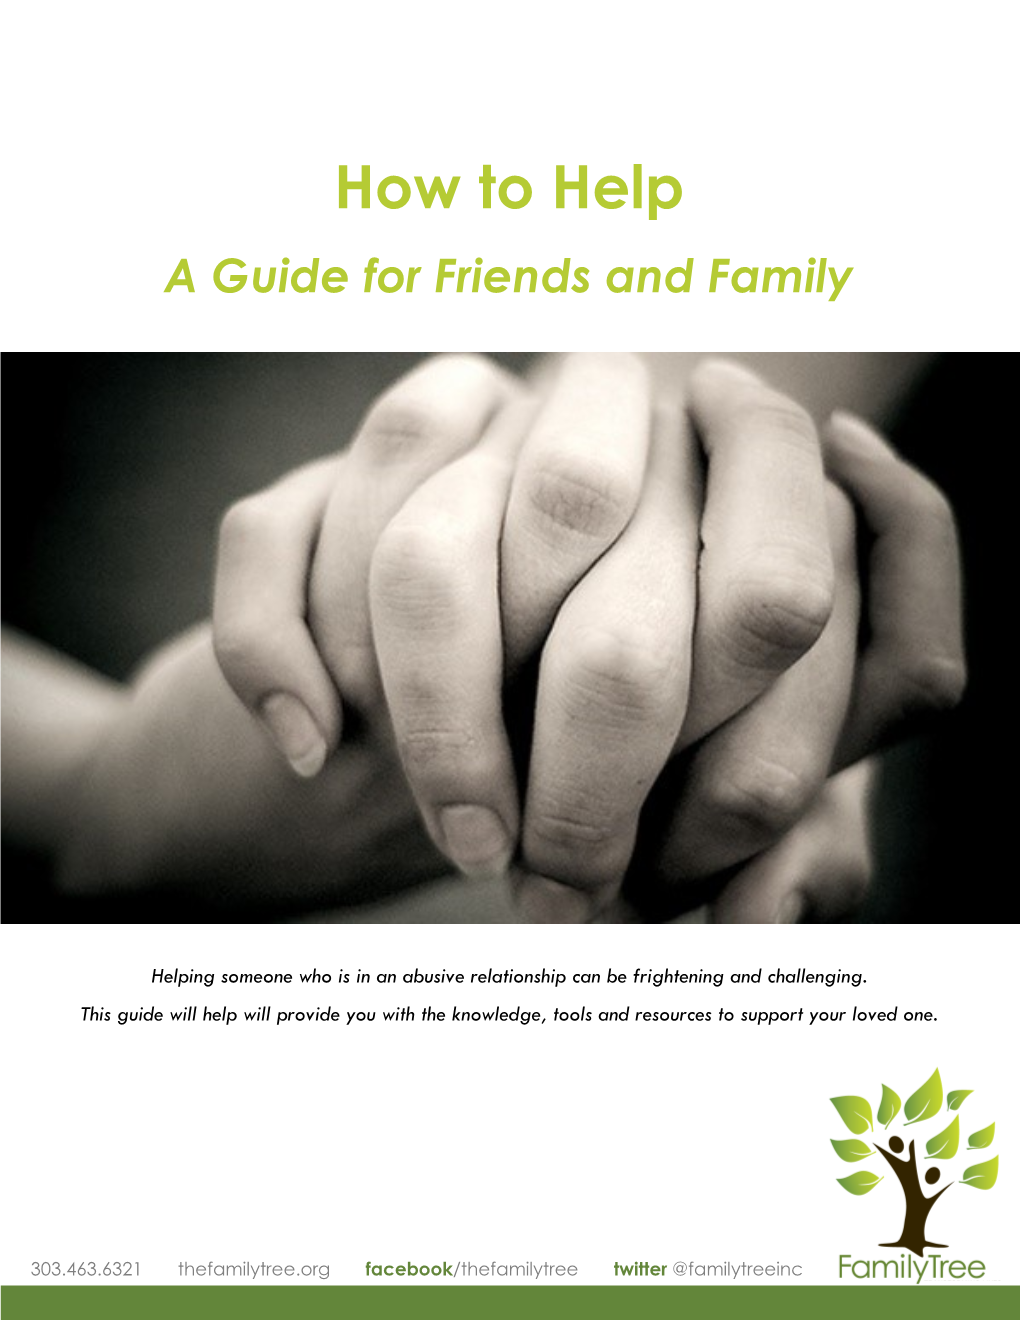 How to Help (Guide for Friends and Family of Domestic Violence